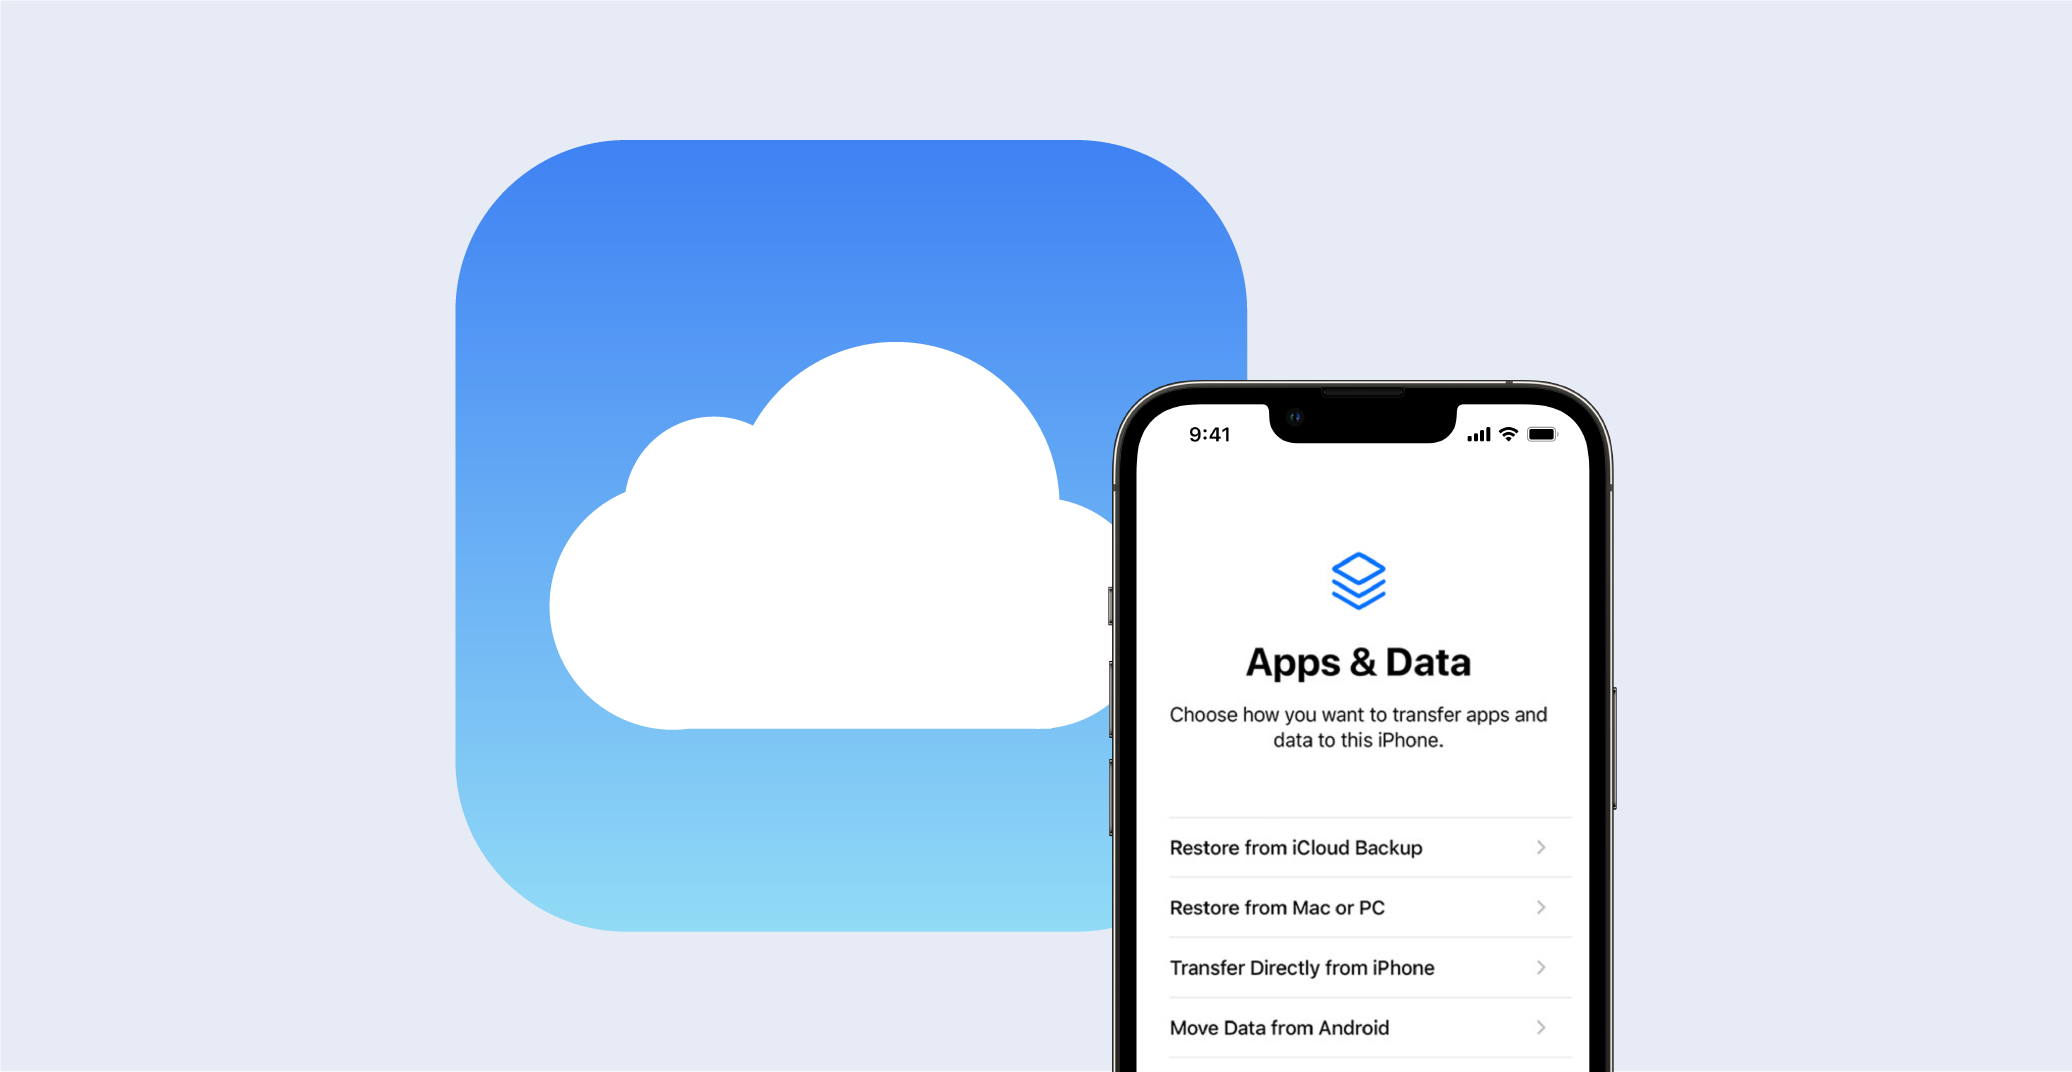 recover an iCloud backup